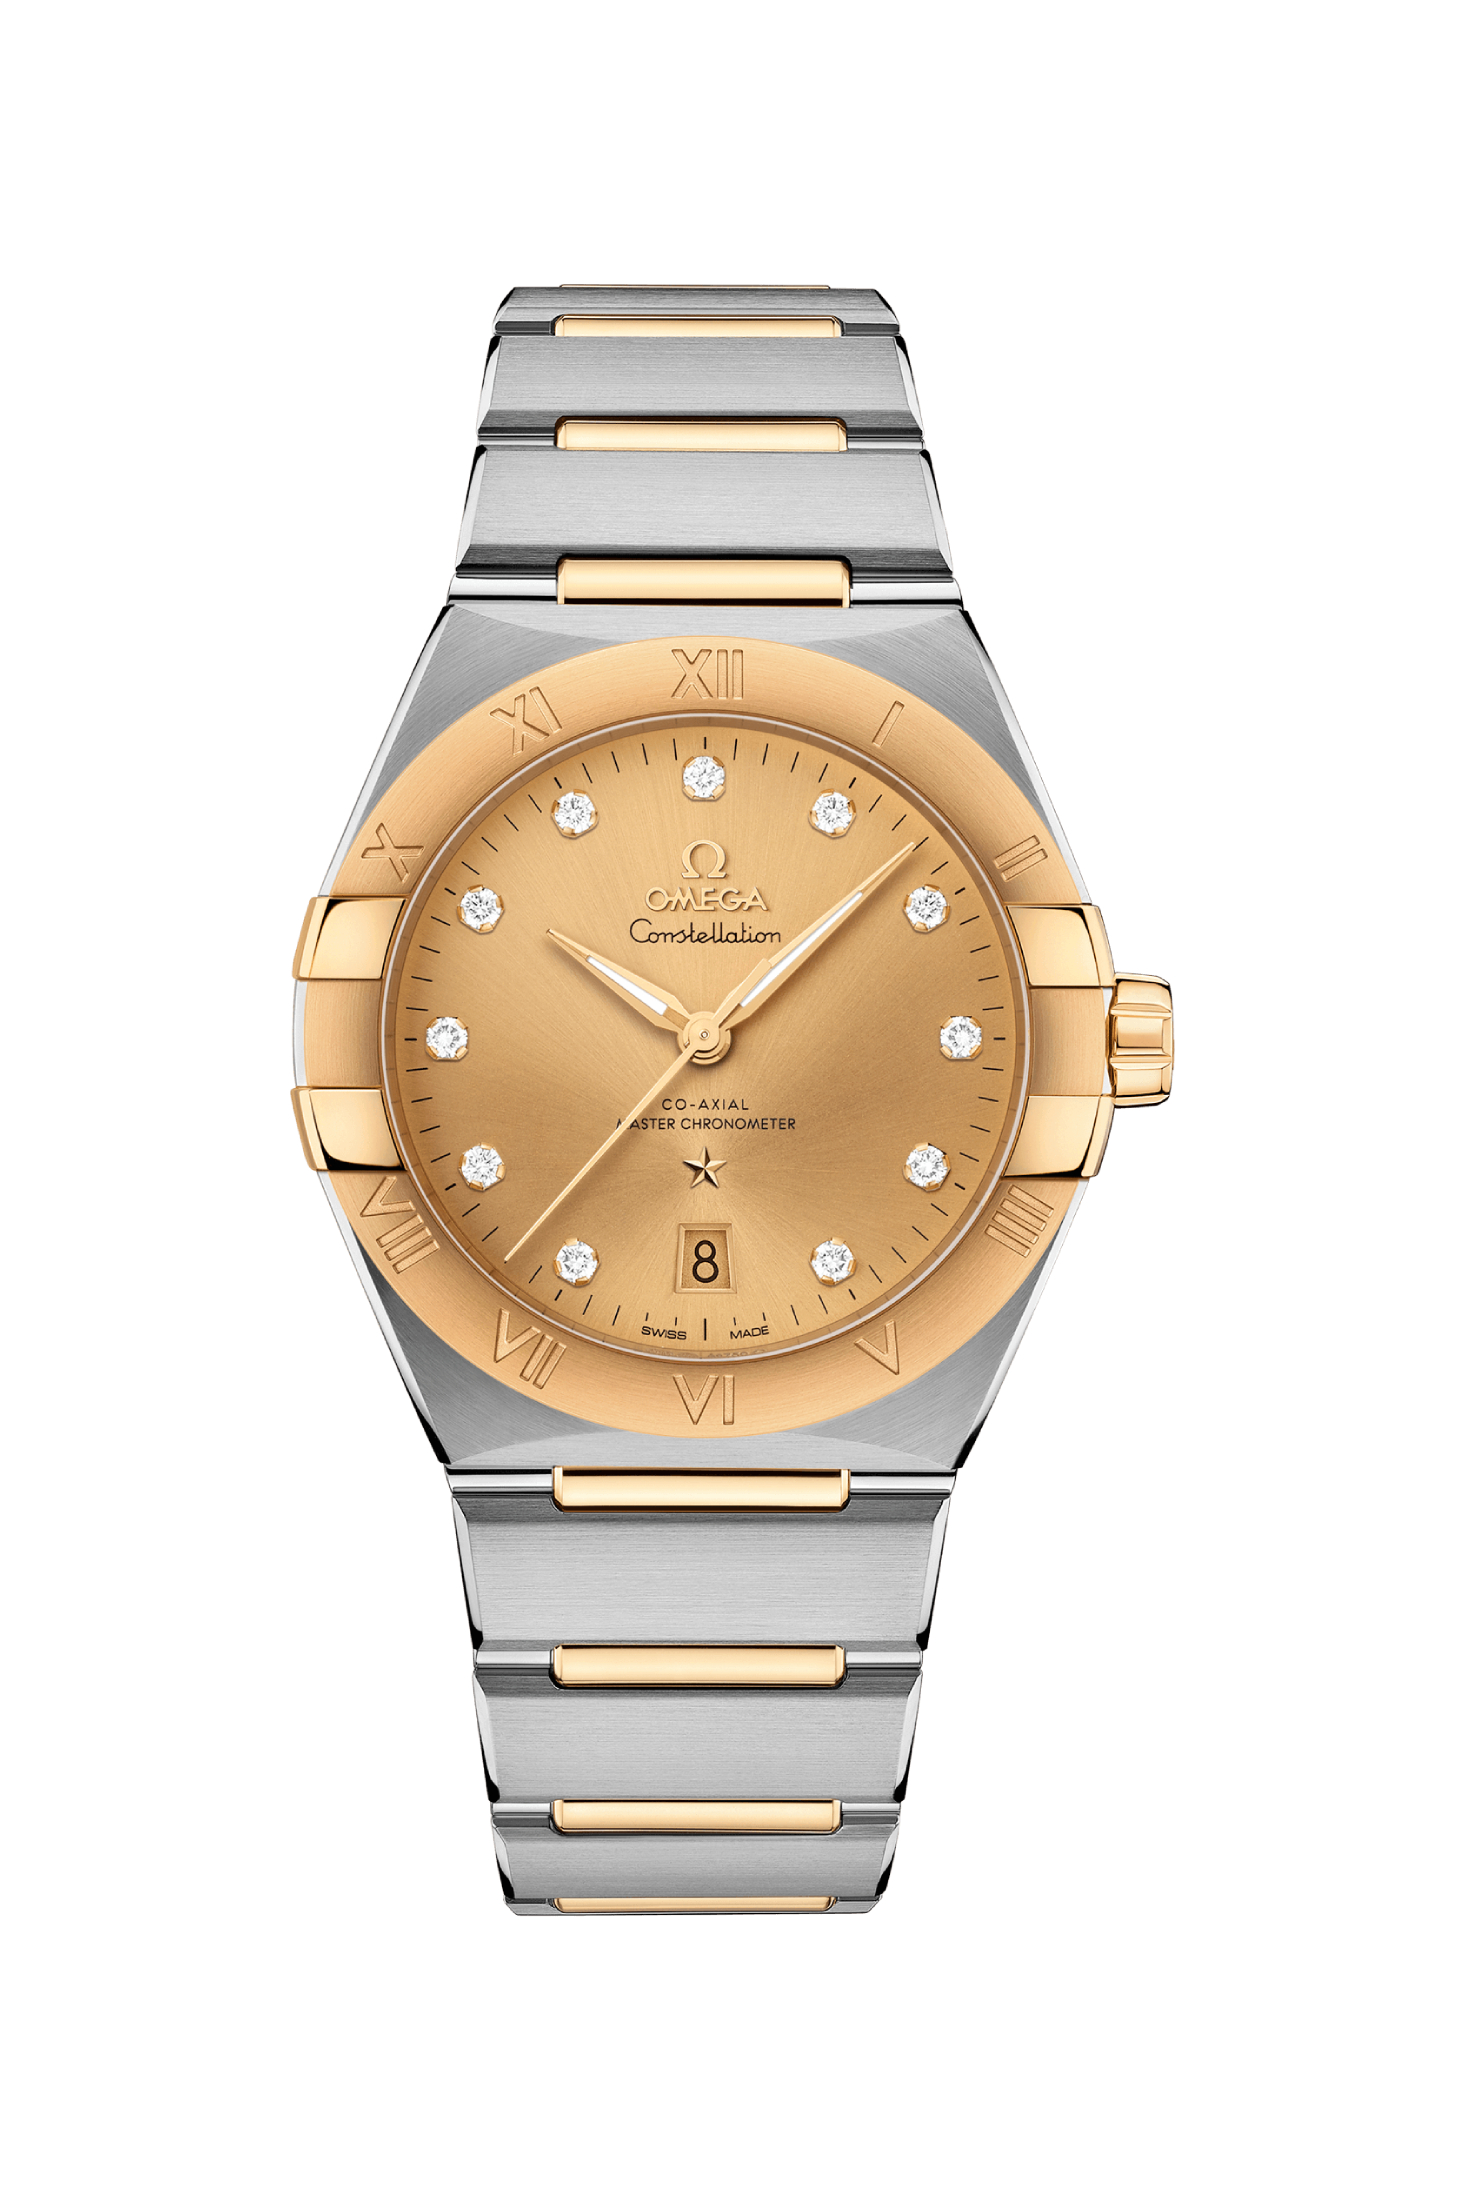 Men's watch / unisex  OMEGA, Constellation Co Axial Master Chronometer / 39mm, SKU: 131.20.39.20.58.001 | watchapproach.com